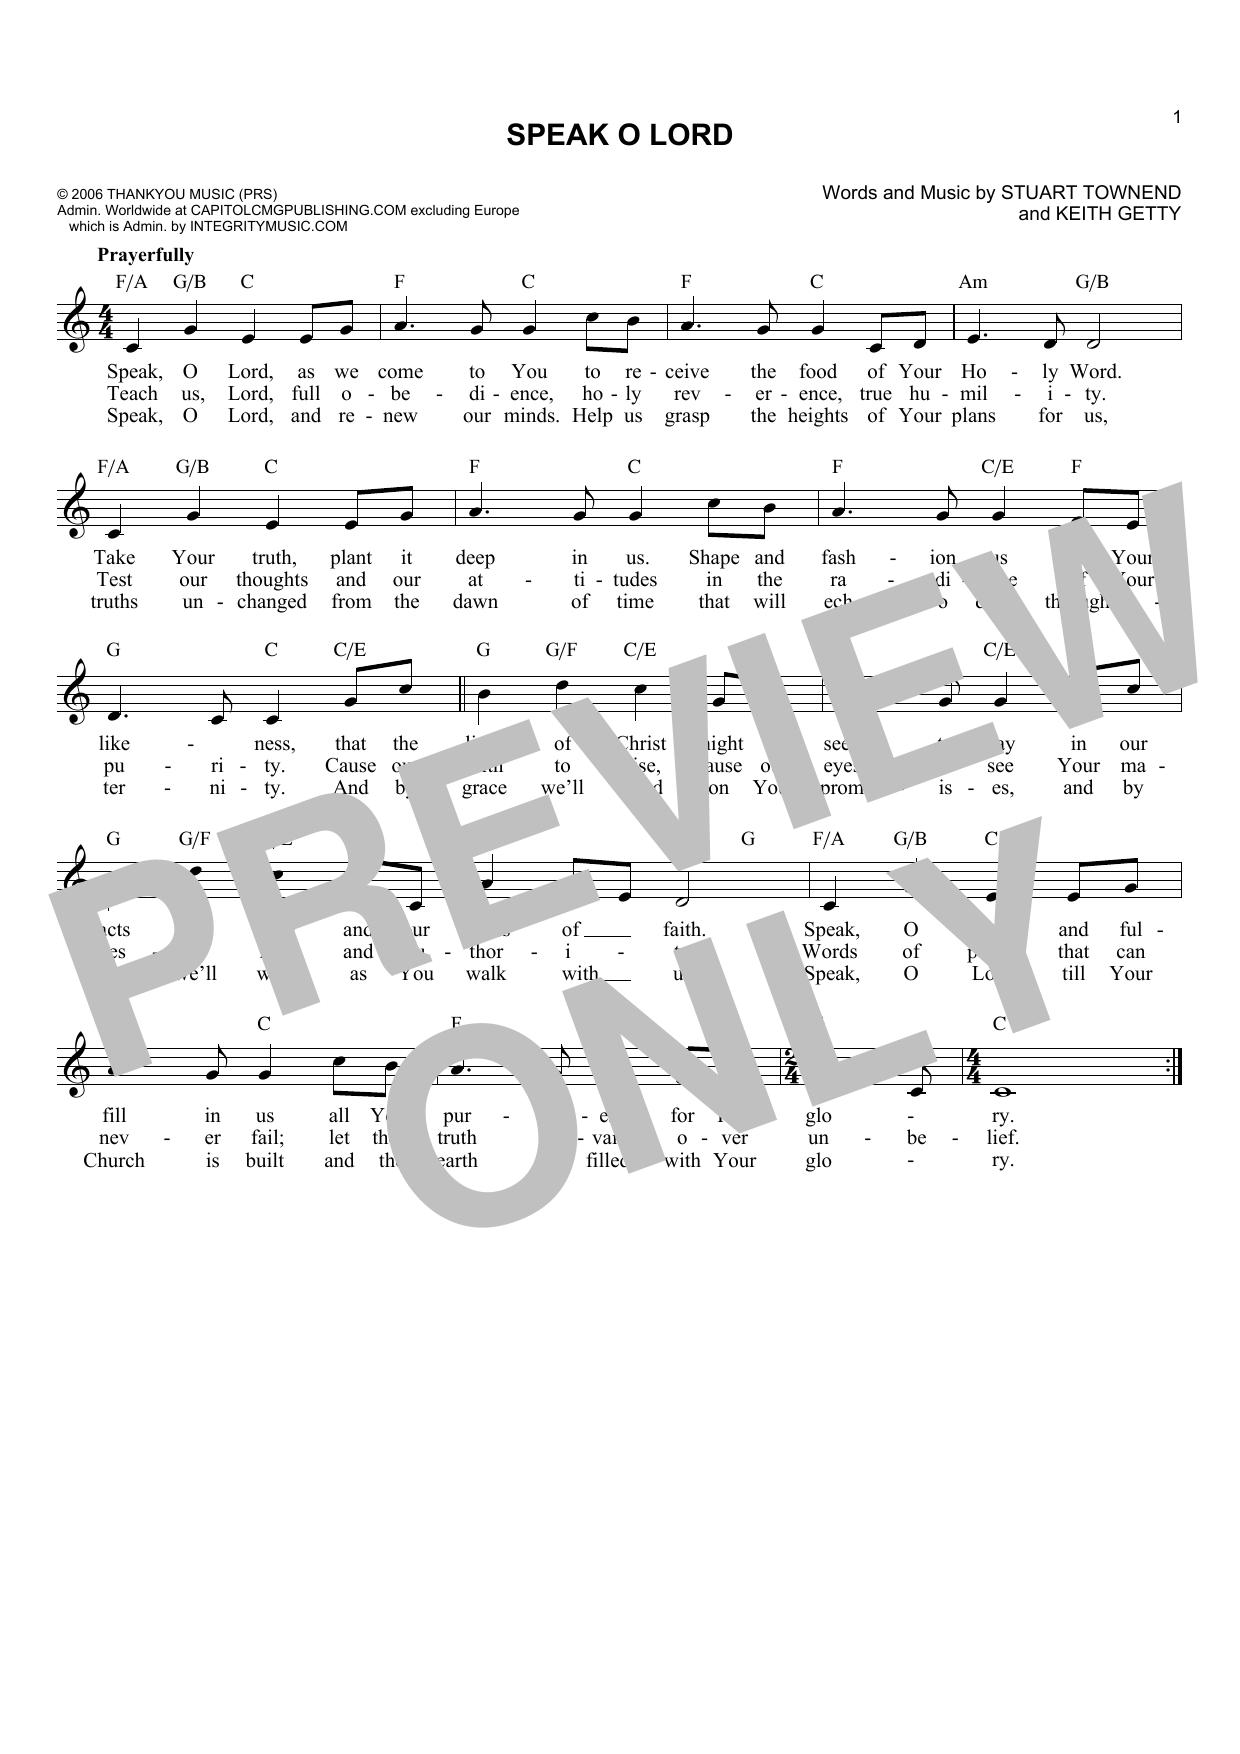 Download Keith Getty Speak O Lord Sheet Music